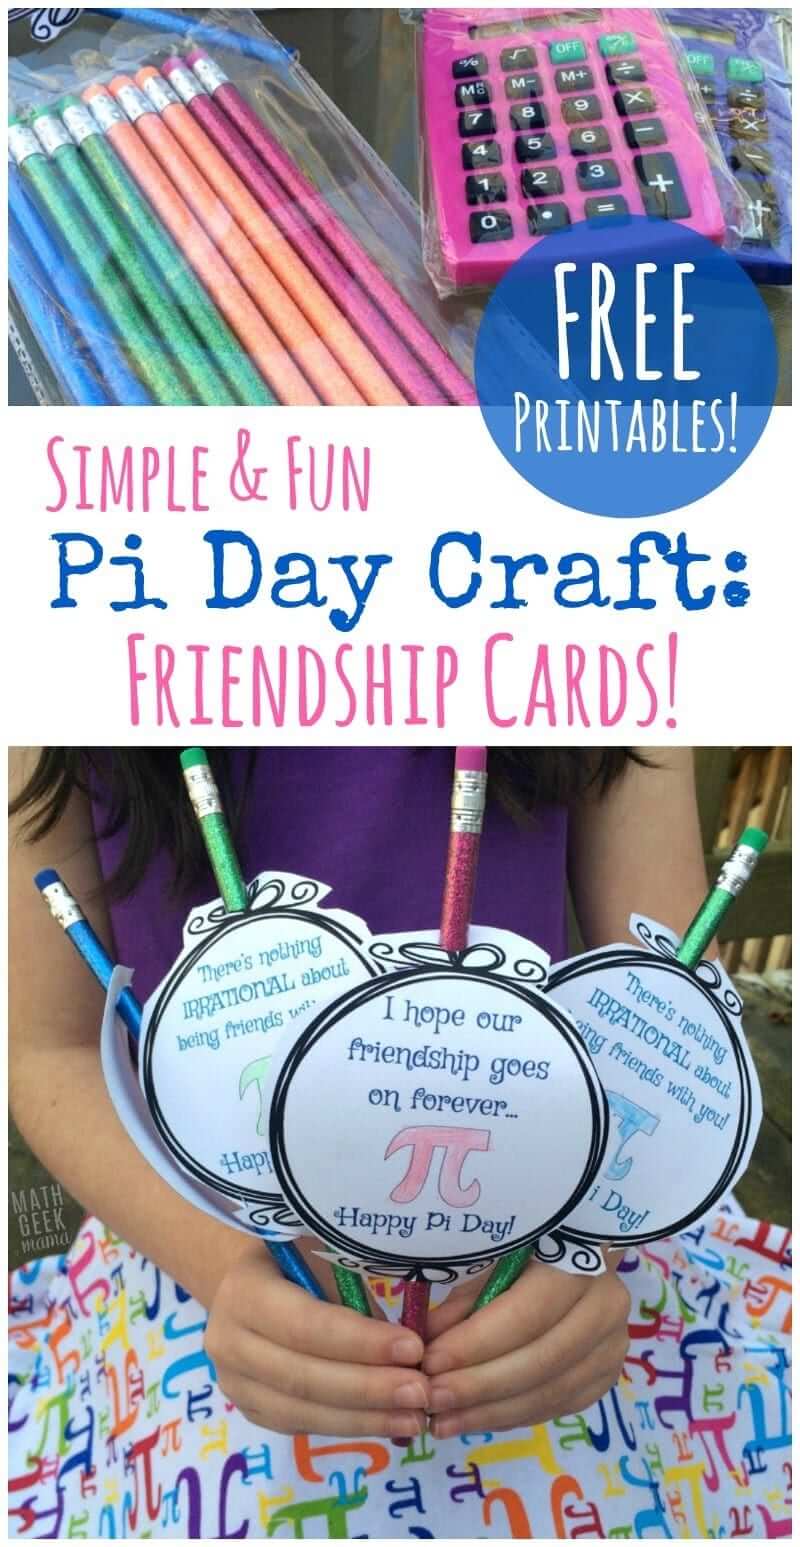 Simple & Fun Pi Day Craft: Friendship Cards! Free printables!